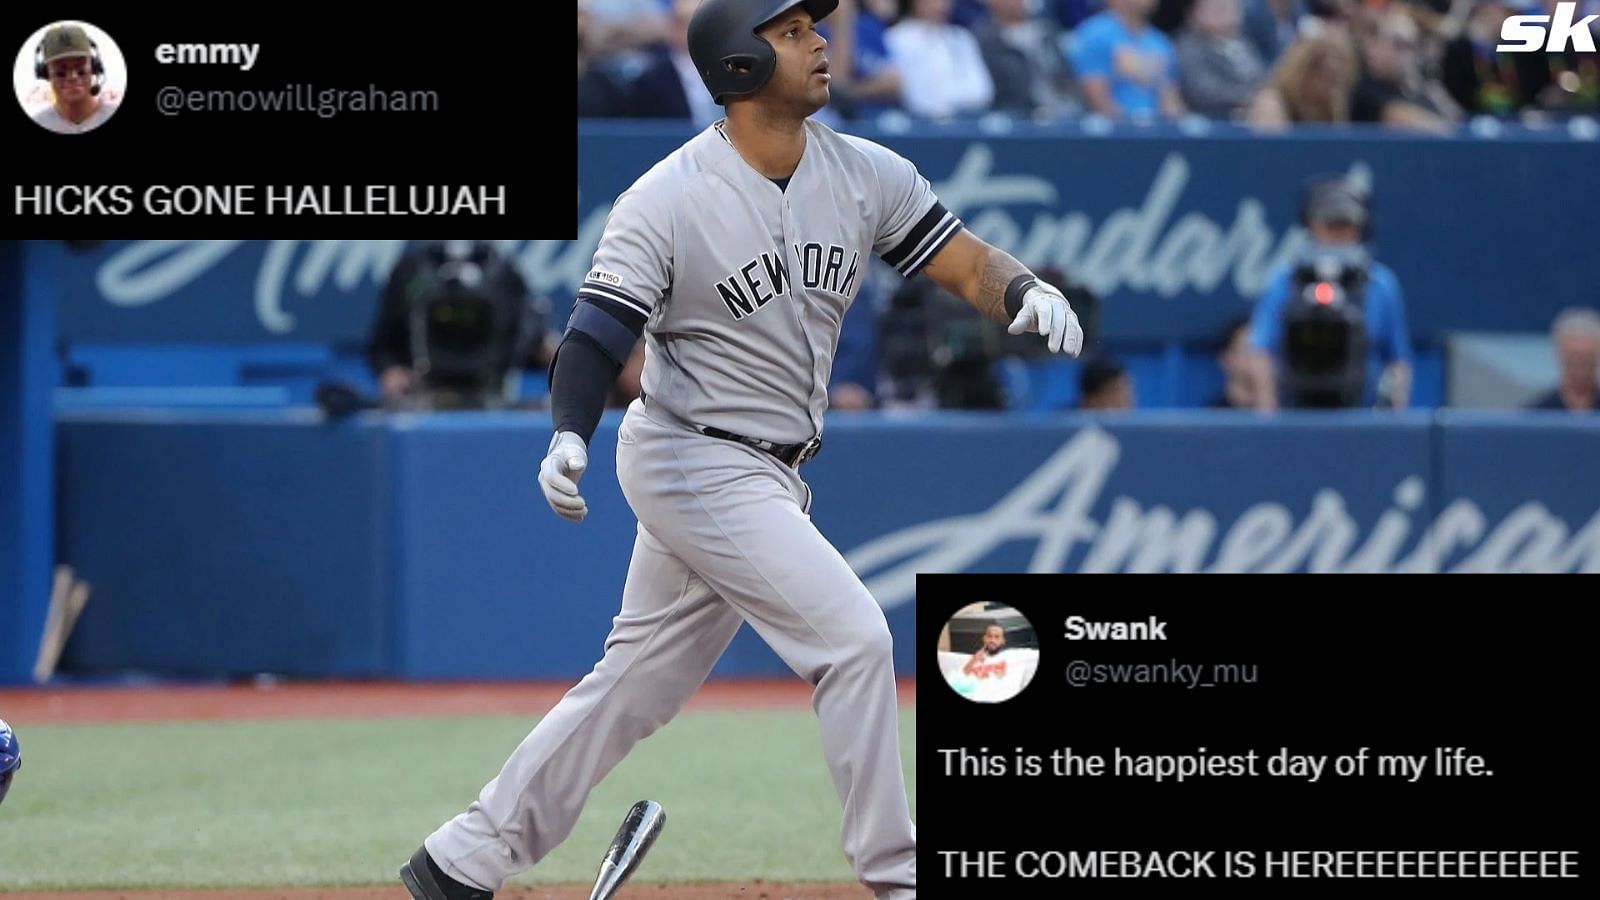 New York Yankees Baseball Player Aaron Hicks Sits Out Game Due to